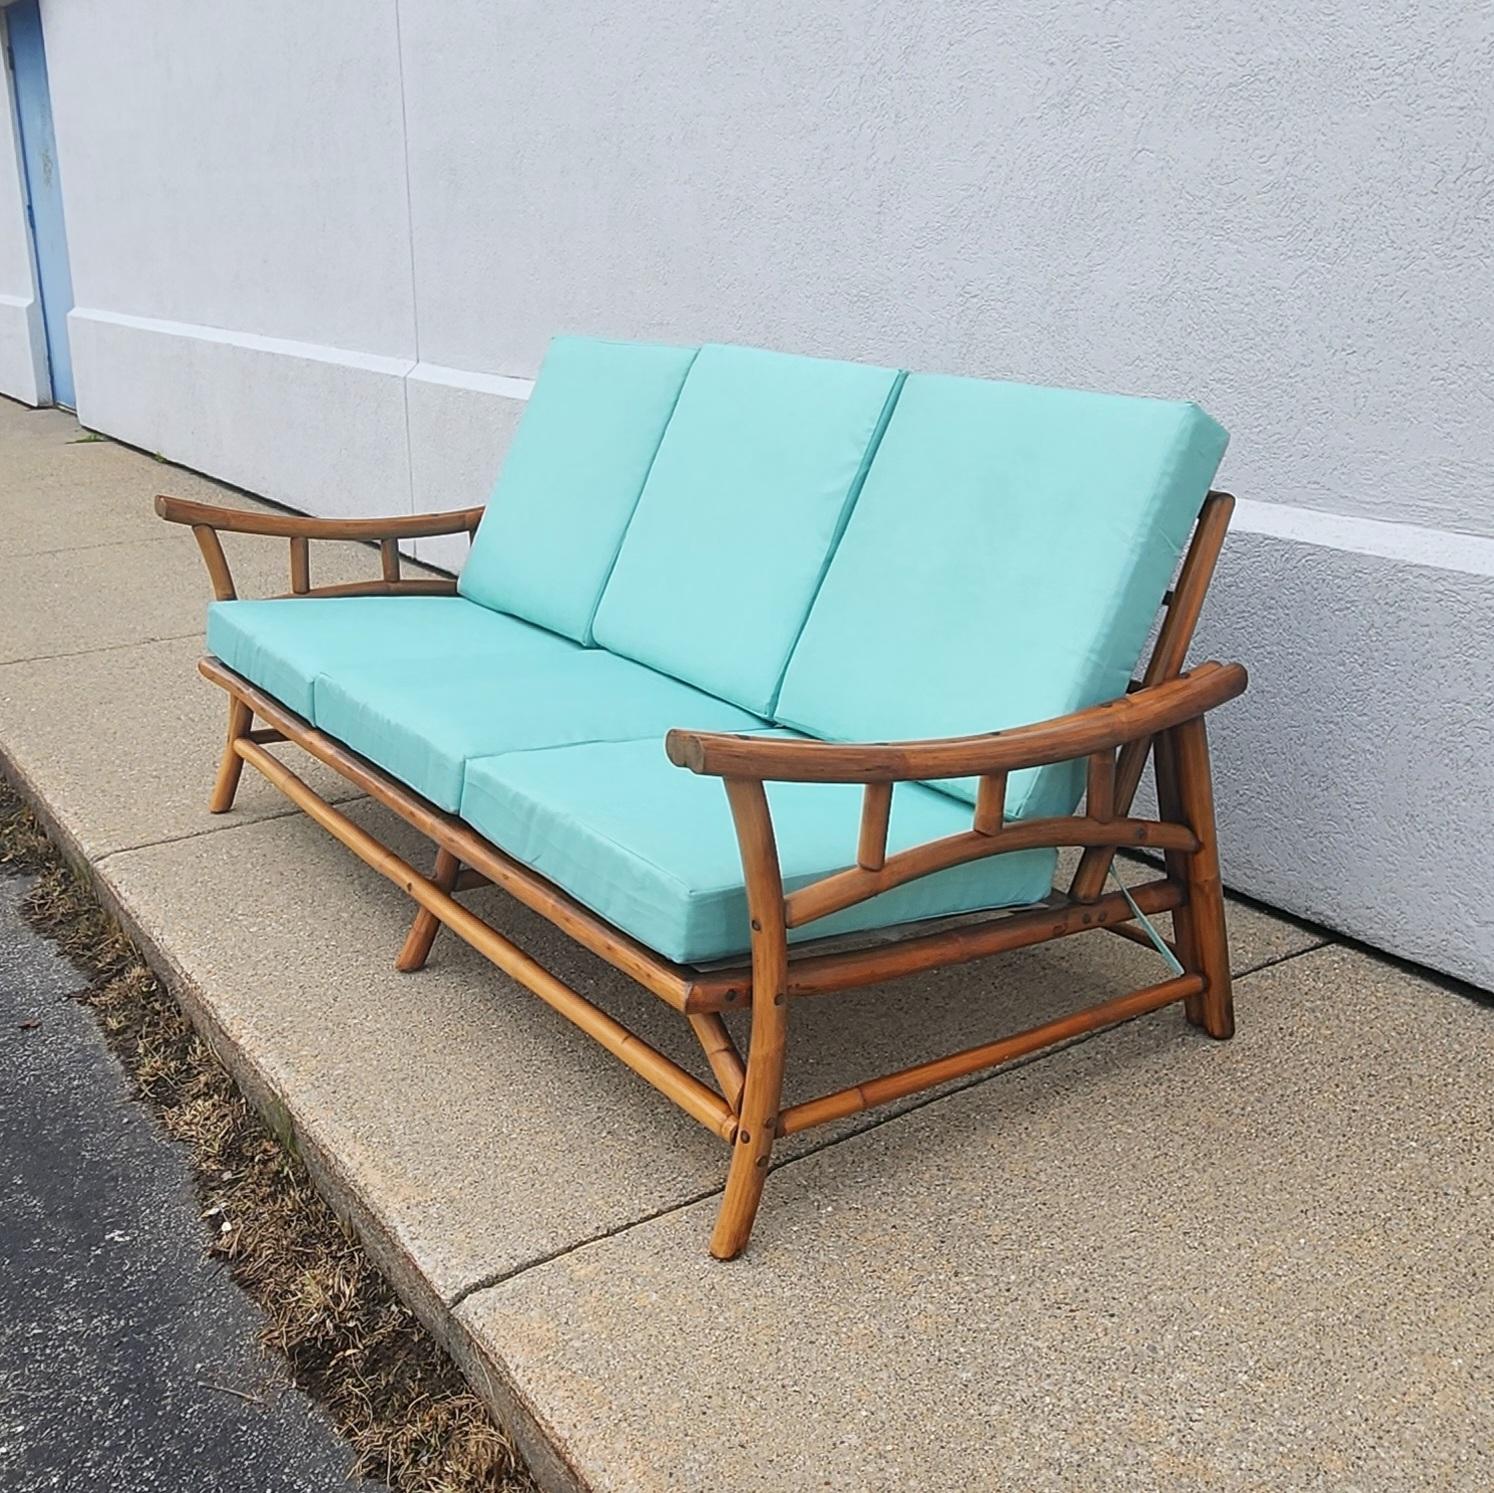 This is a unique Ficks and Reed rattan sofa that comfortably sits 3. Complete with new turquoise blue cushions that has a faint grass cloth pattern. It has an original natural amber brown colored finish with a beautiful sculptural like form. Wire